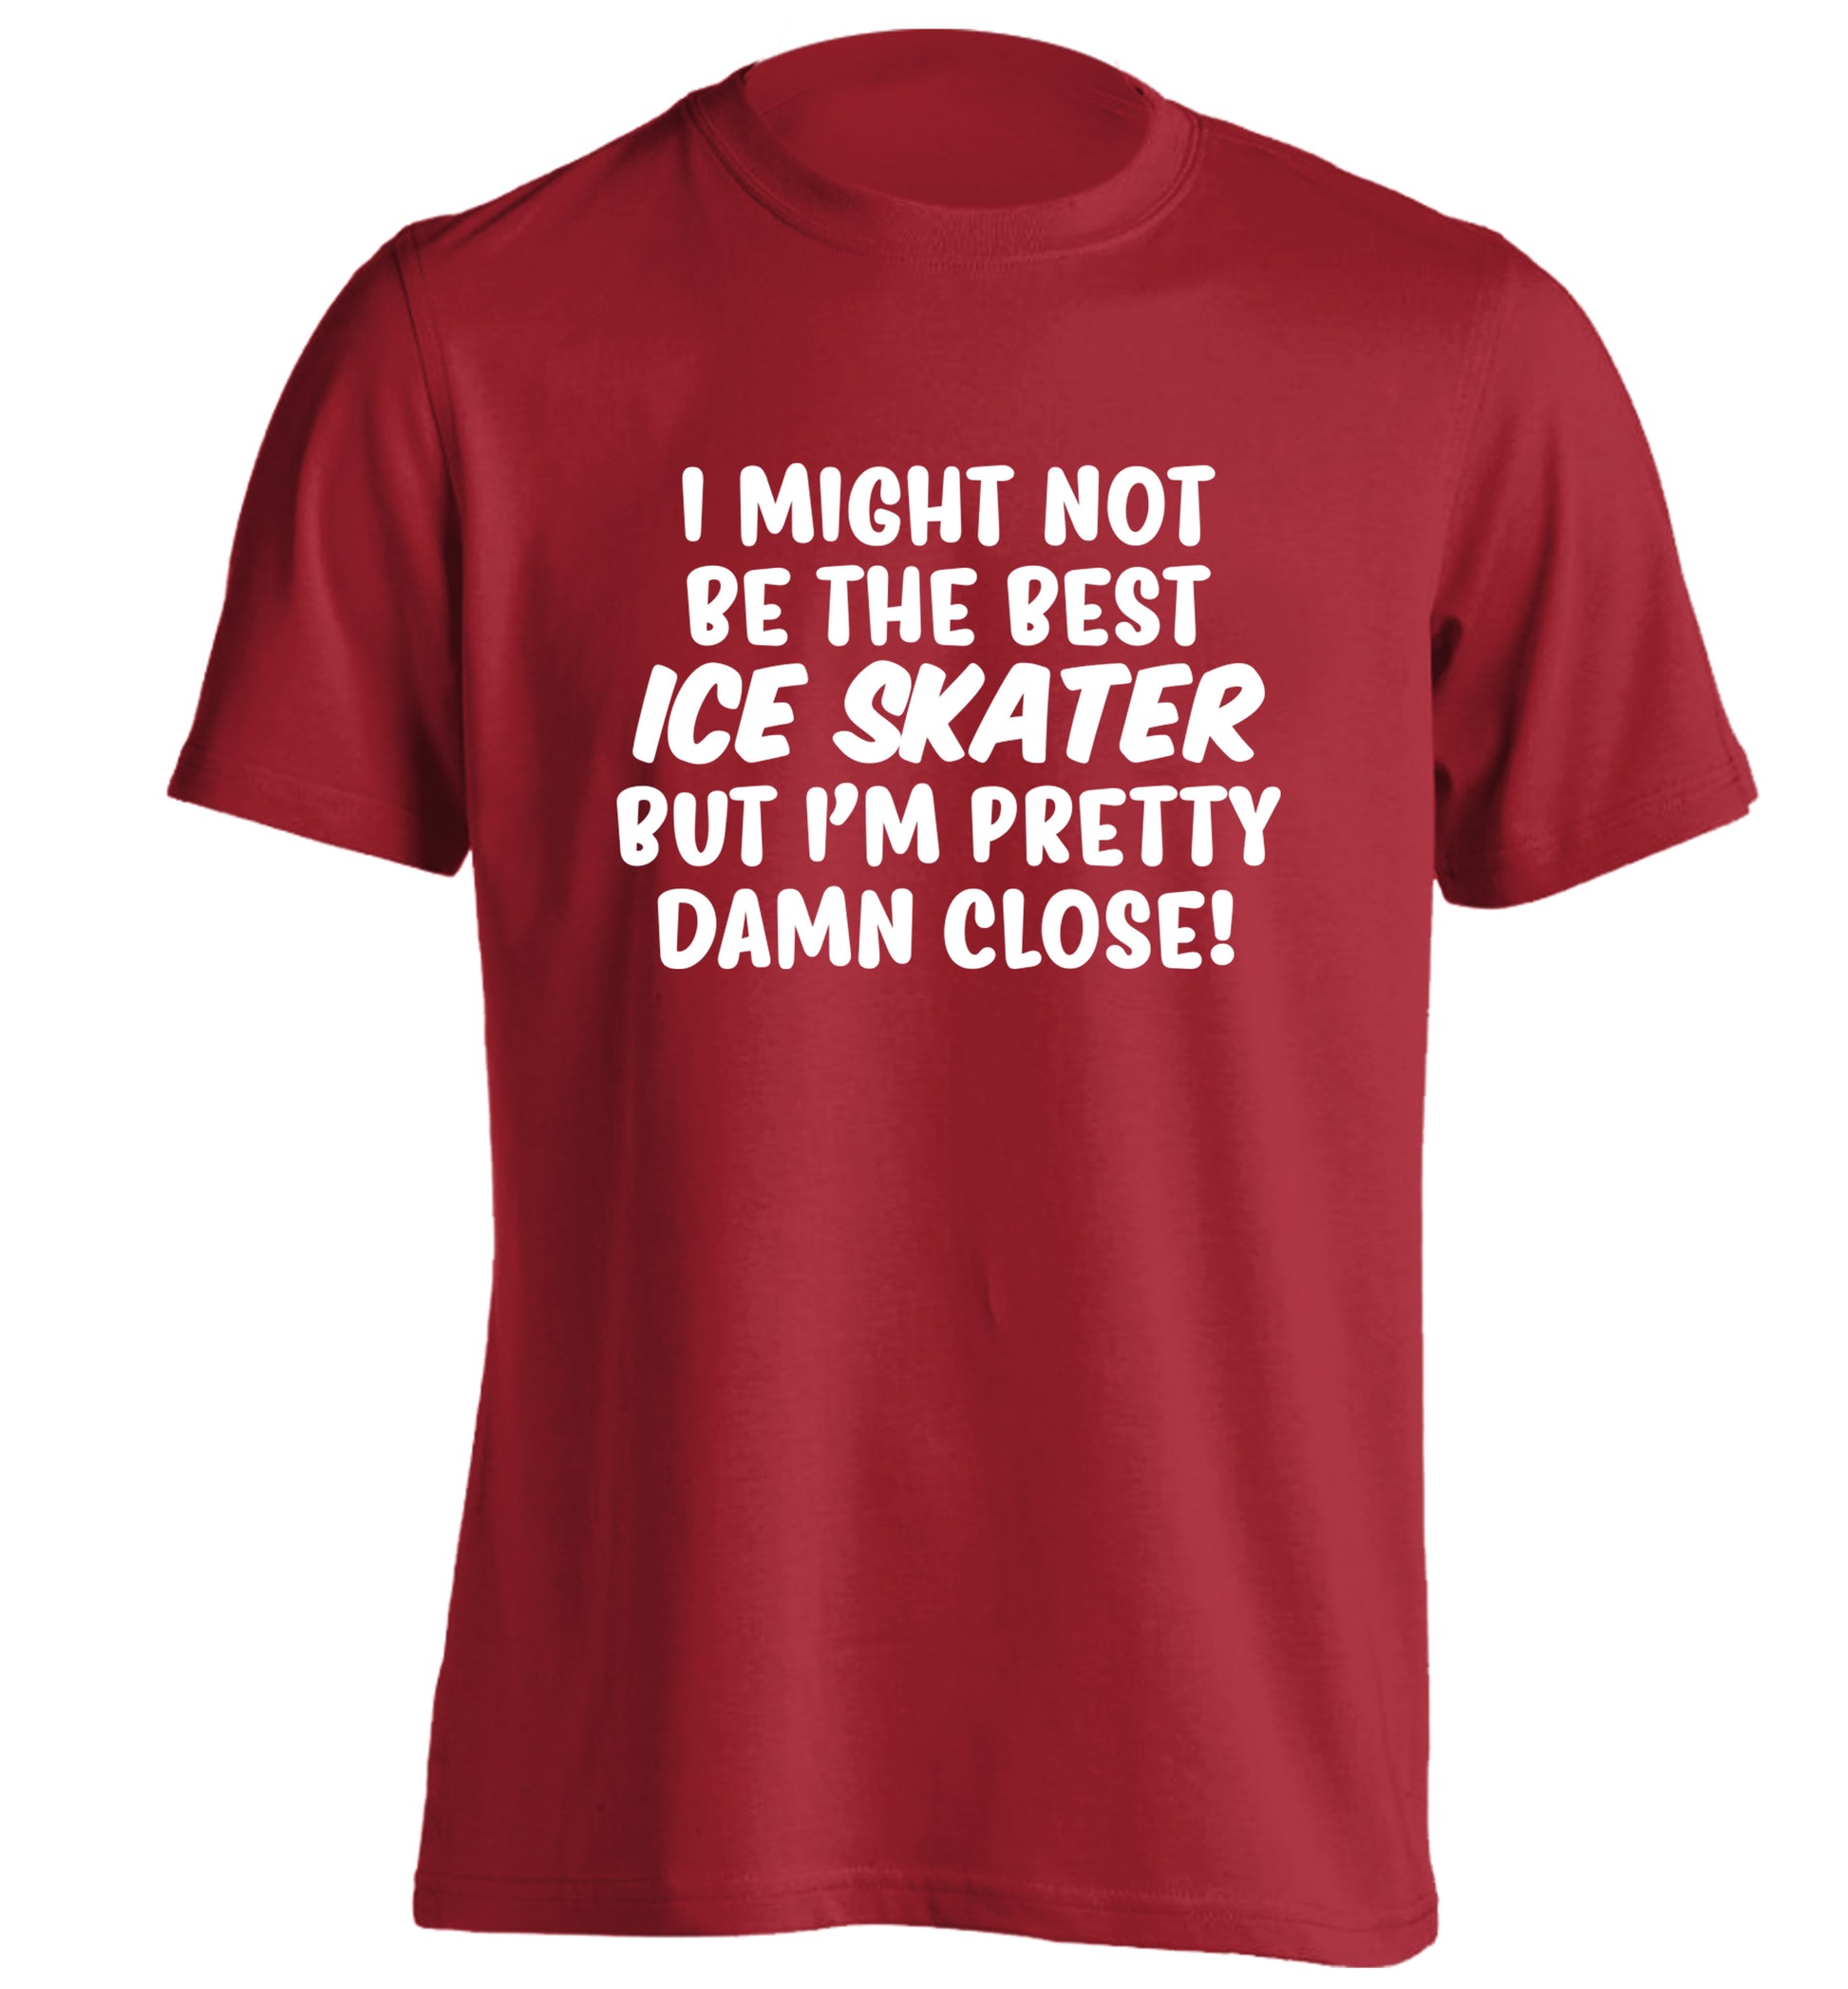 I might not be the best ice skater but I'm pretty damn close! adults unisexred Tshirt 2XL